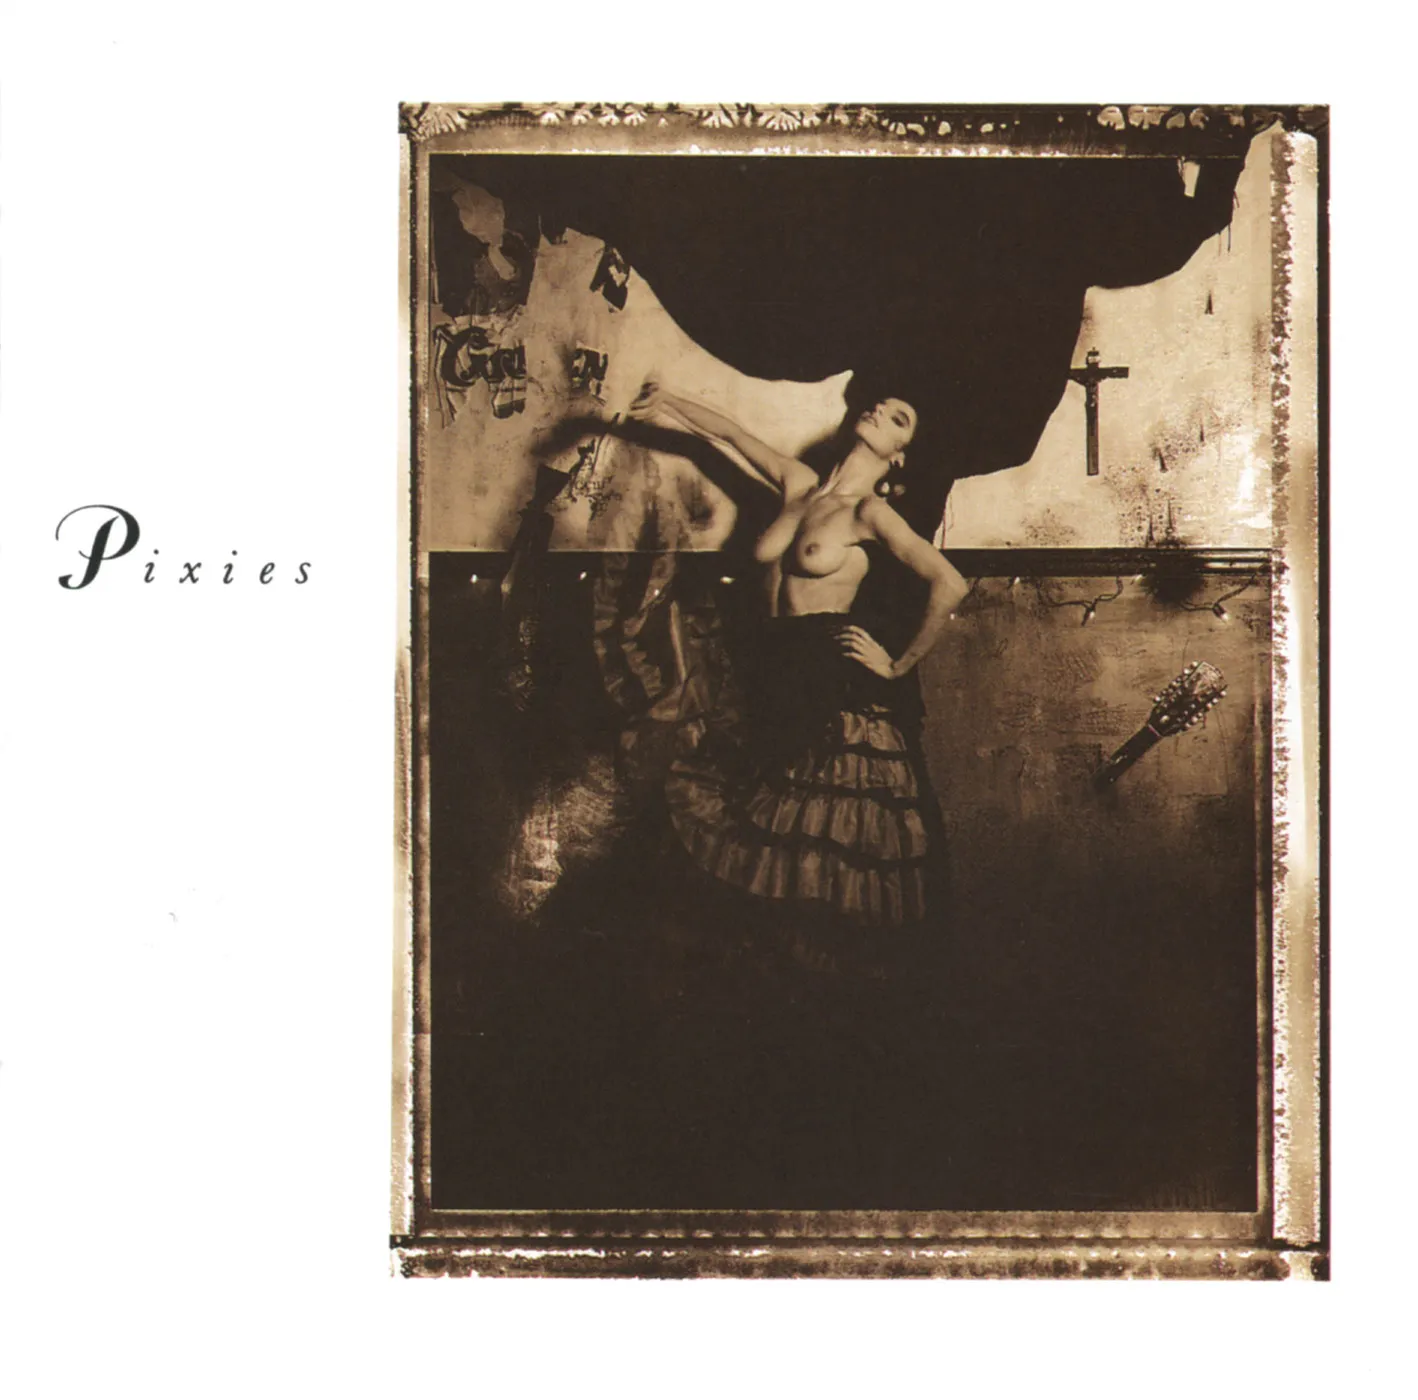 <strong>Pixies - Surfer Rosa / Come On Pilgrim</strong> (Cd)